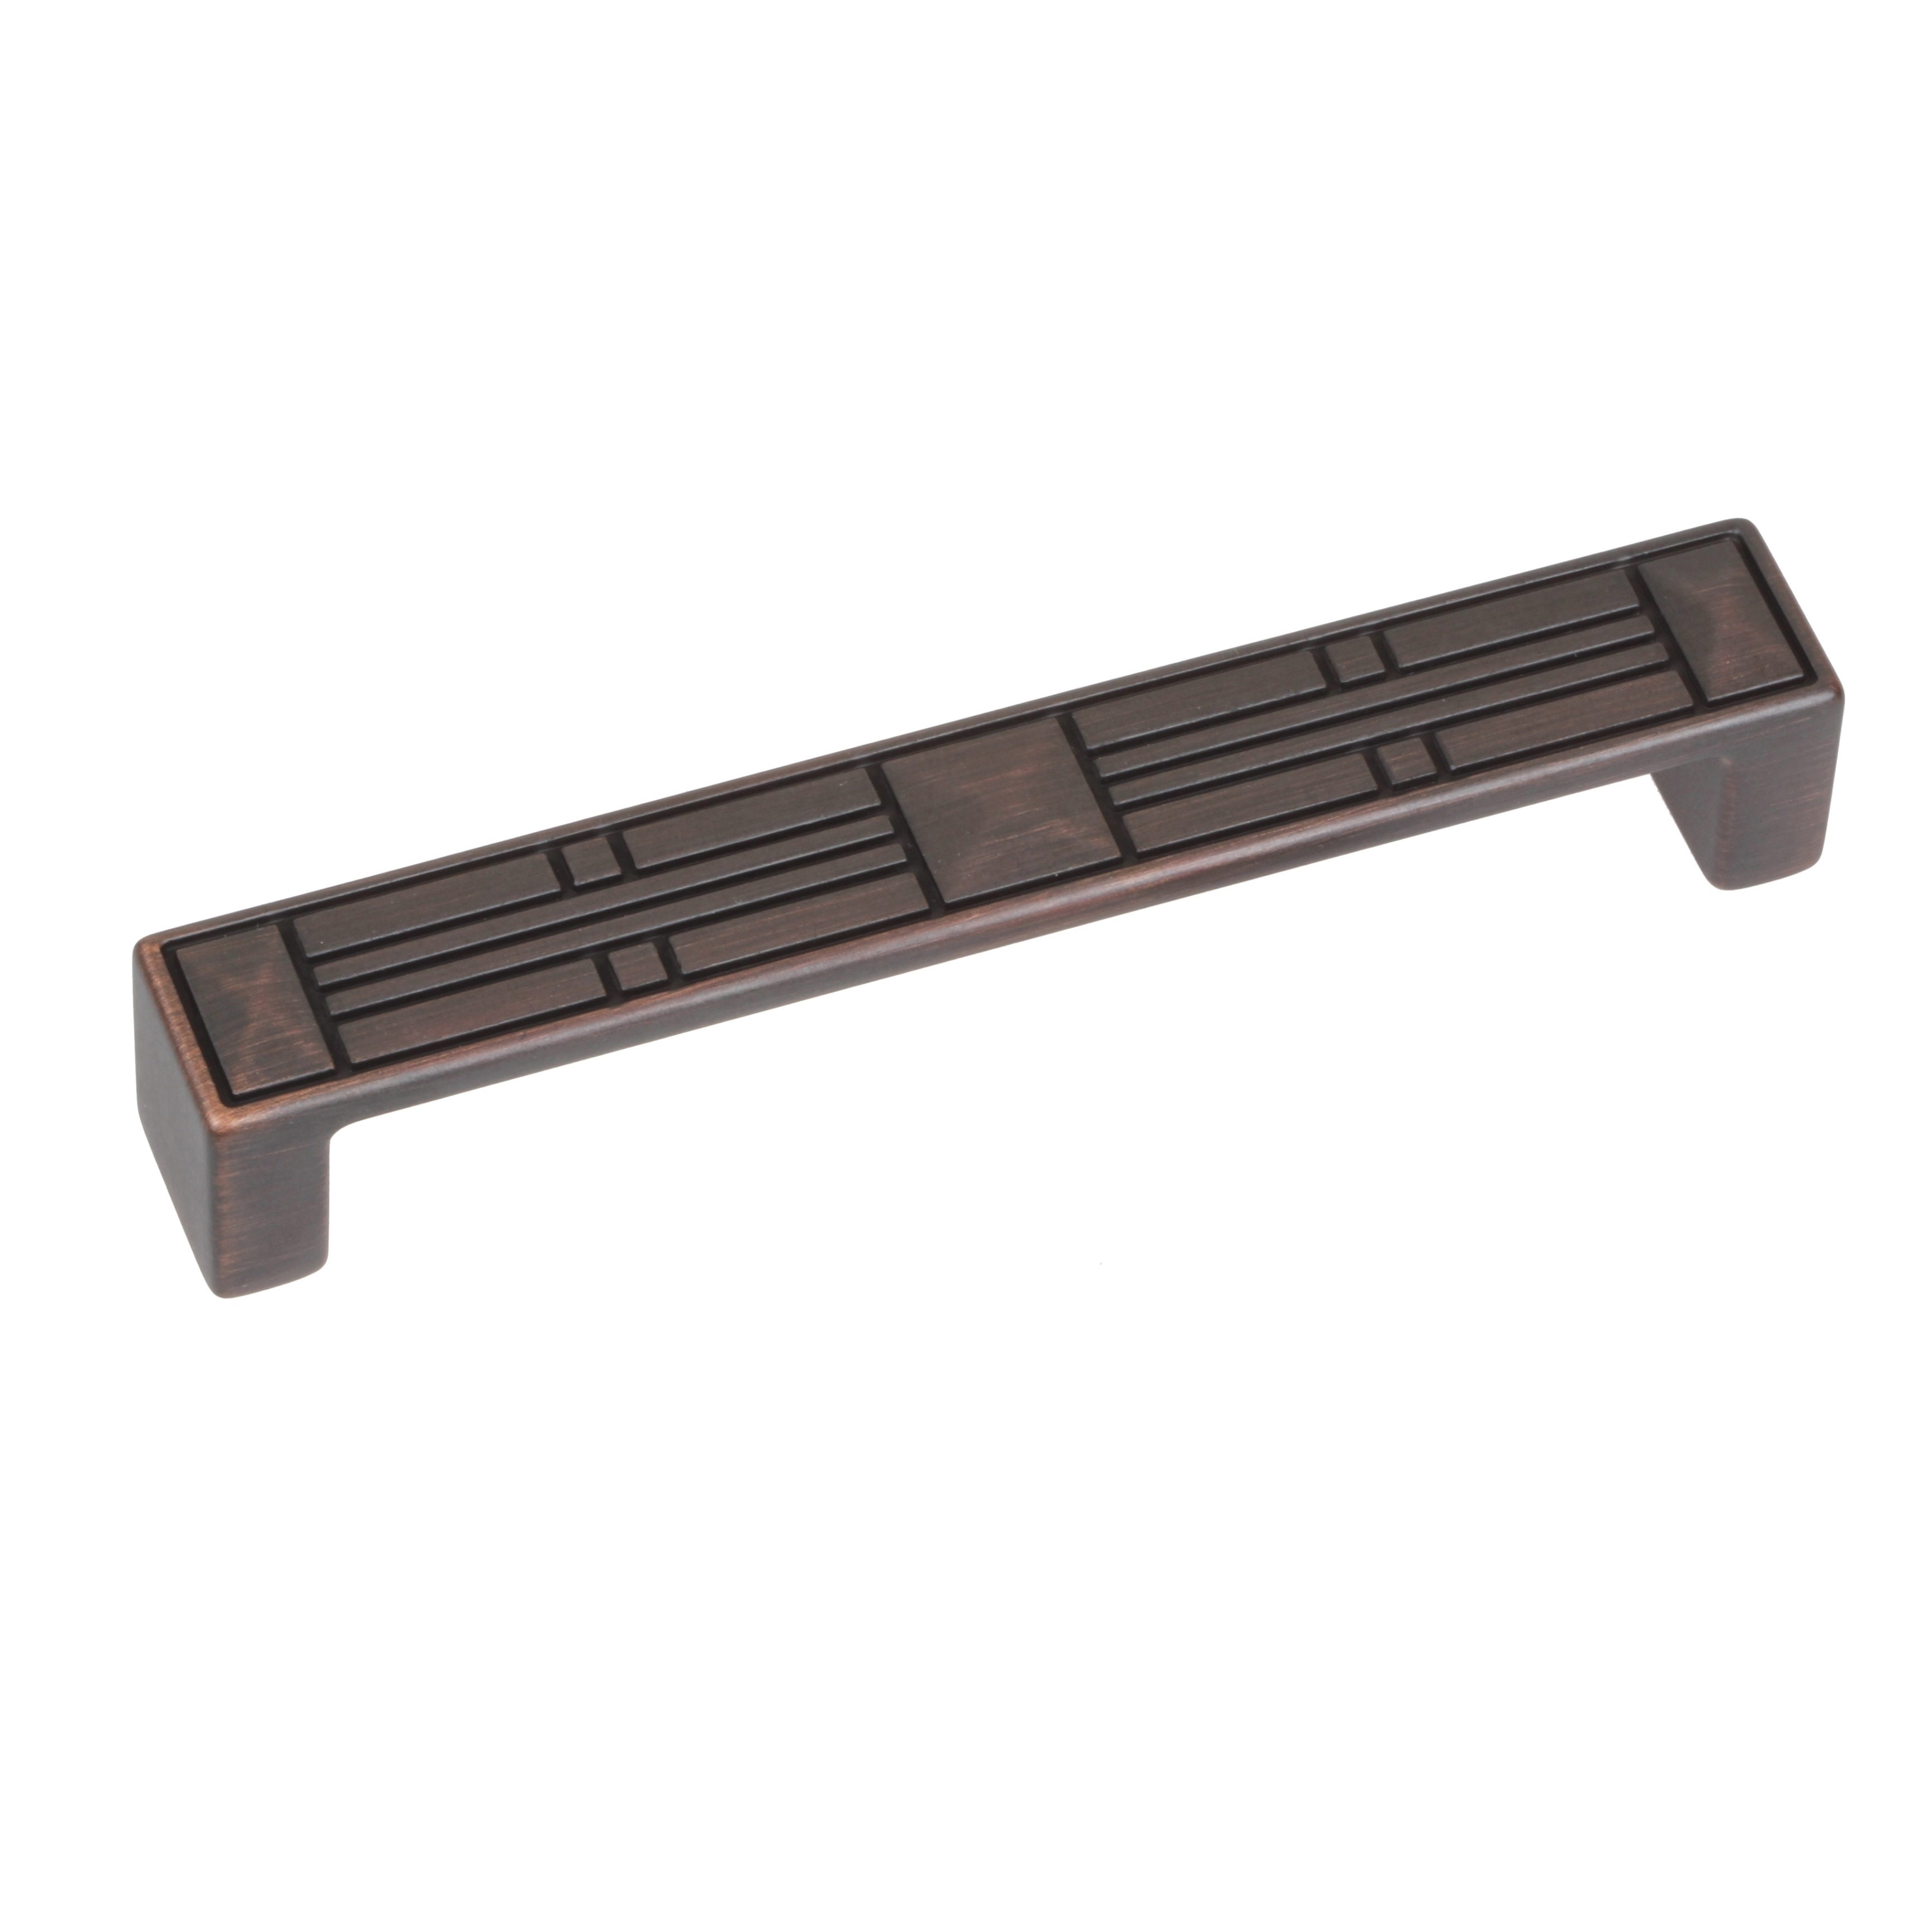 GlideRite 5 in. Center Modern Rectangular Flat Pyramid Pull Cabinet Hardware Handles, Oil Rubbed Bronze, Pack of 10 - image 1 of 4